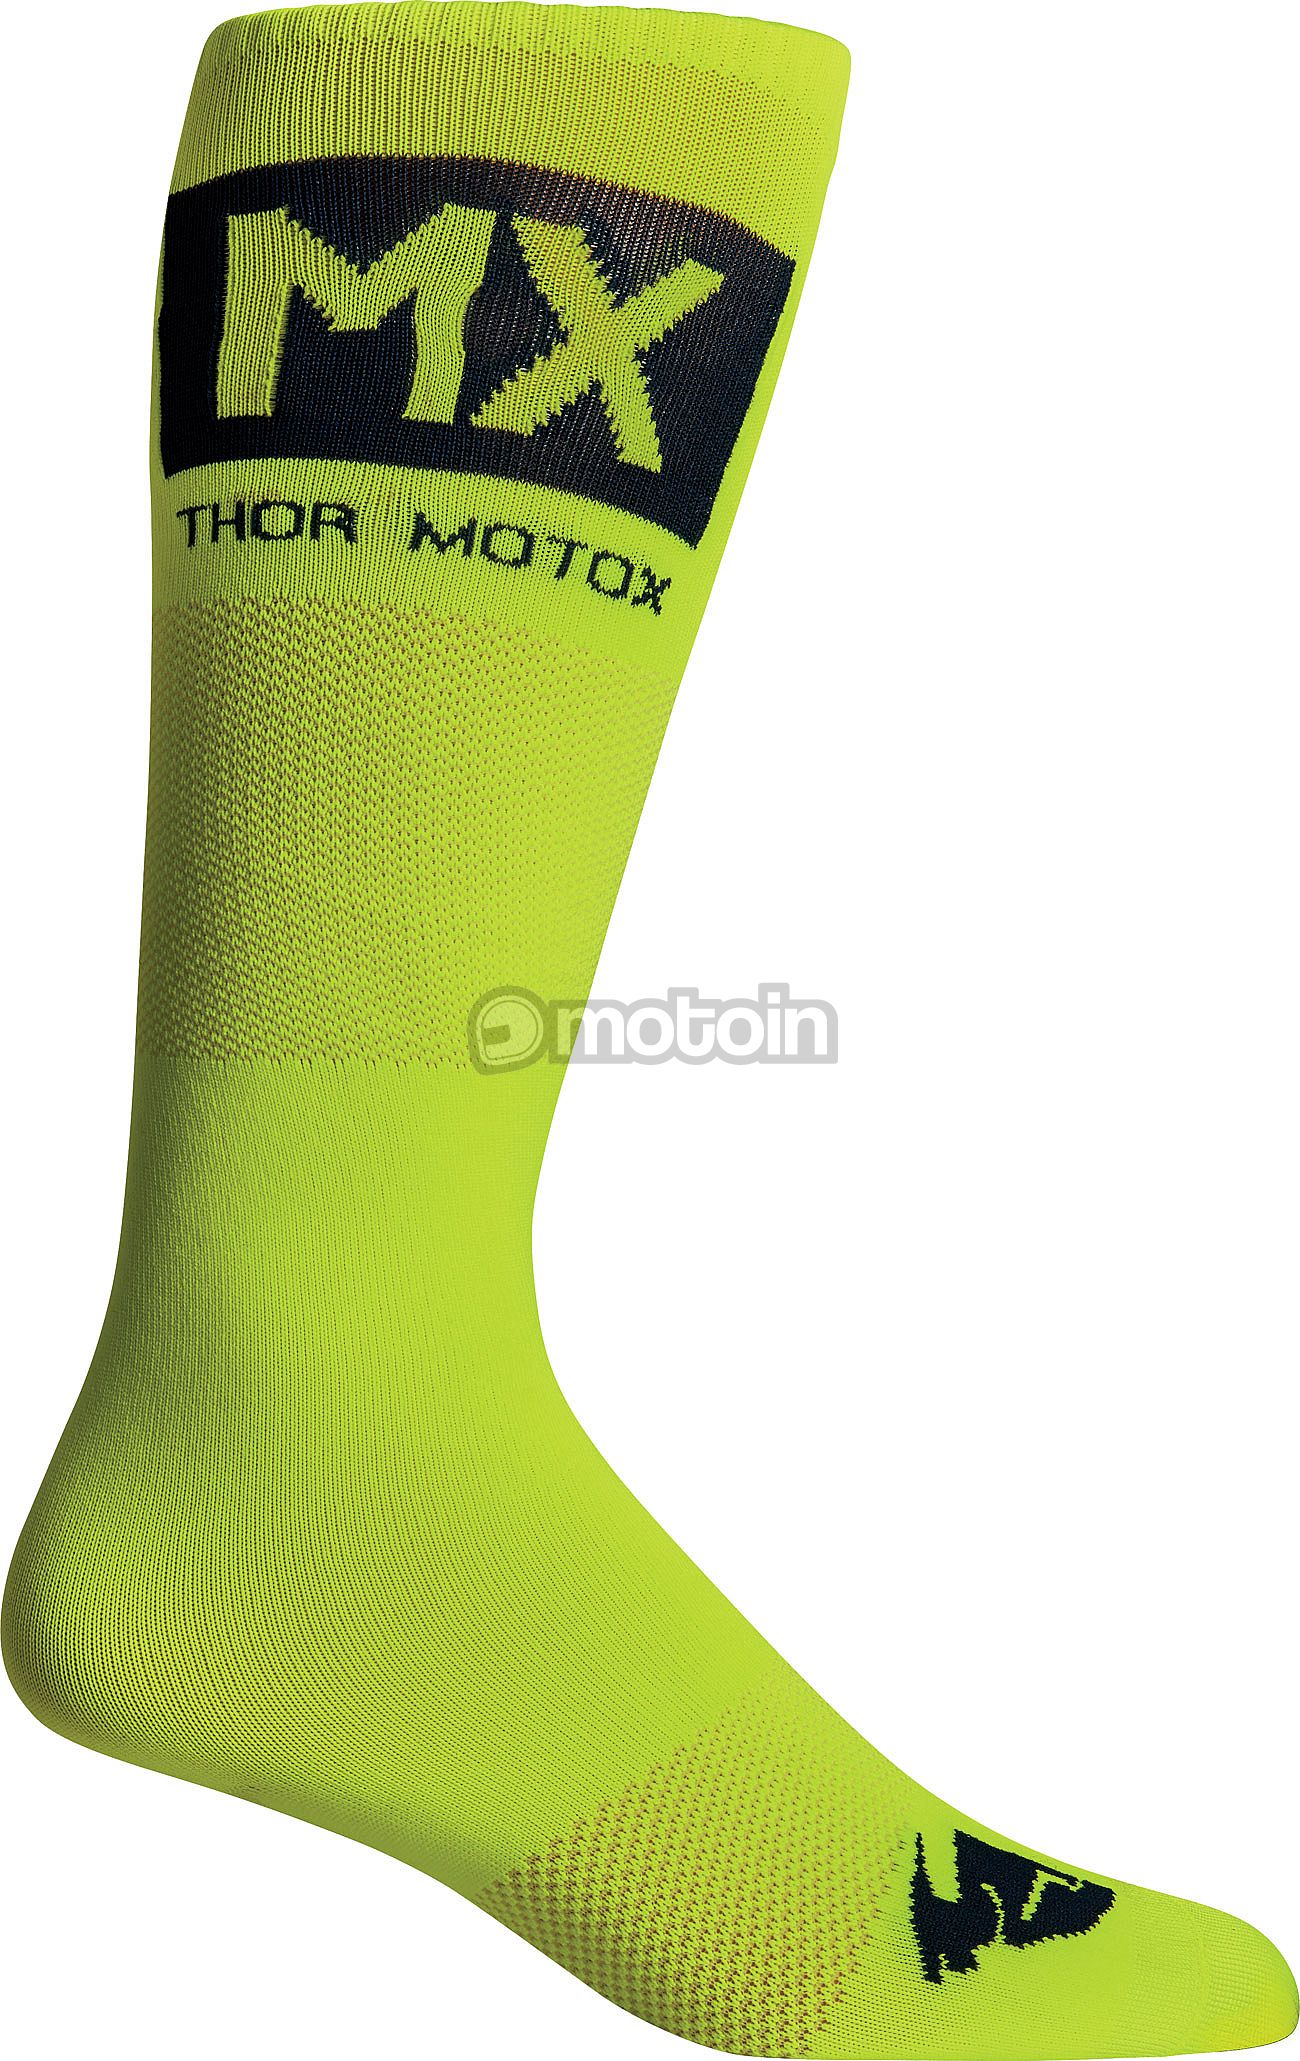 Thor MX Cool, calcetines